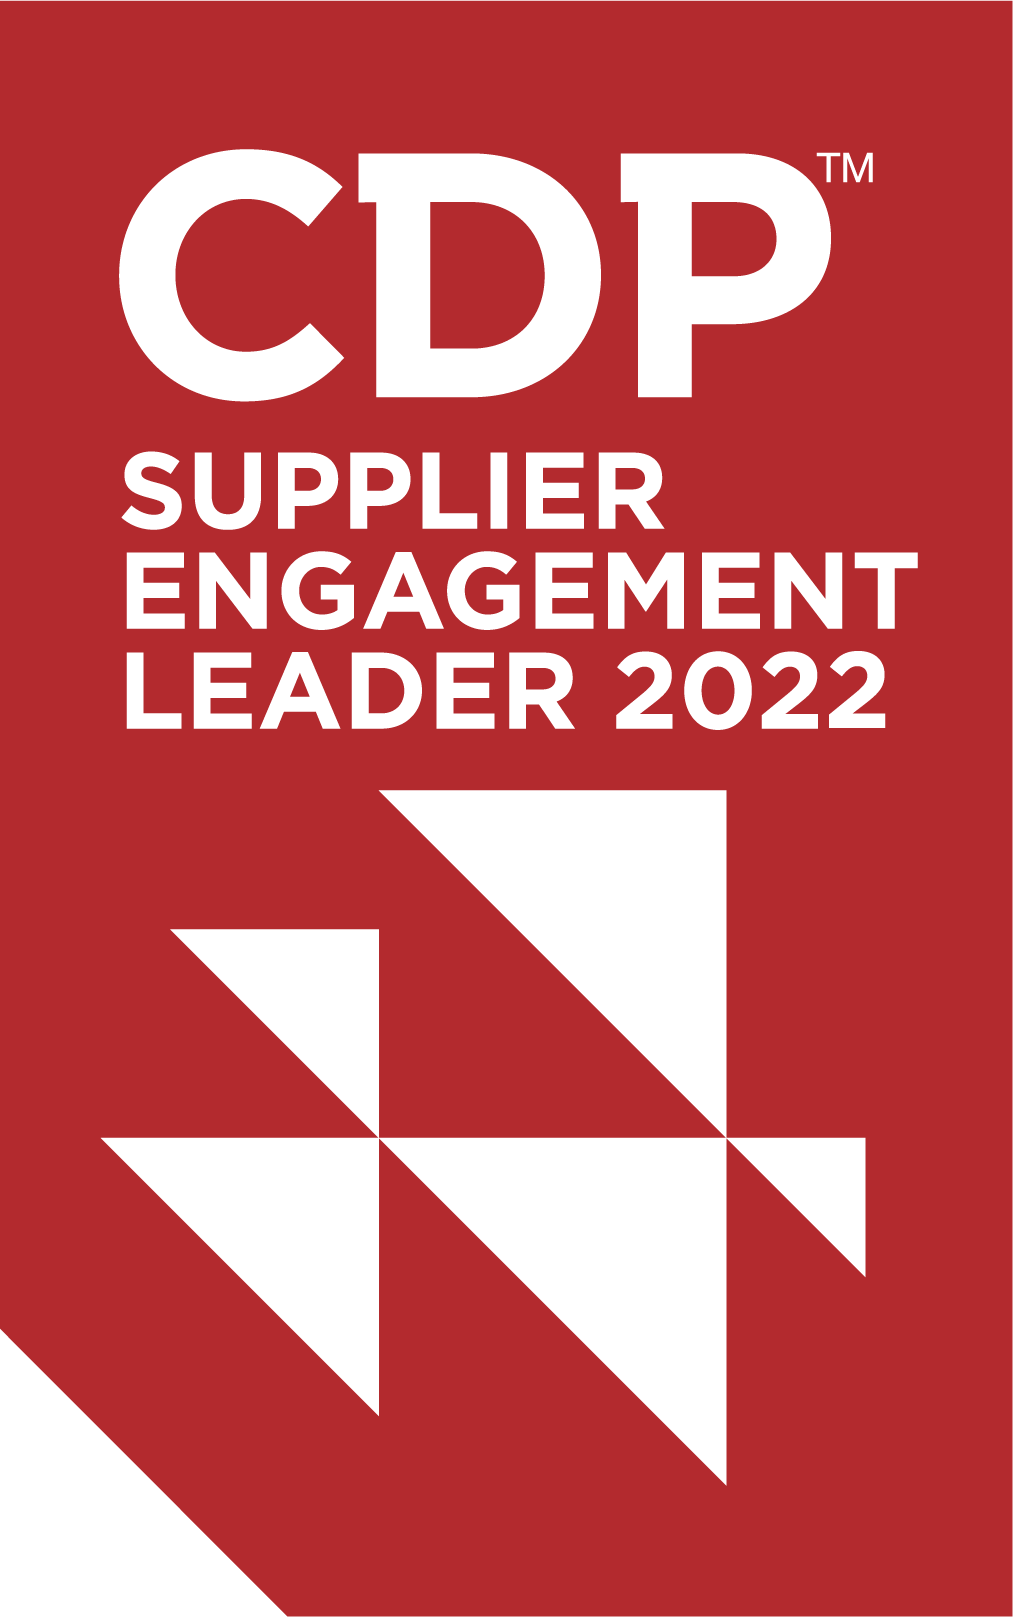 CDP Supplier Engagement